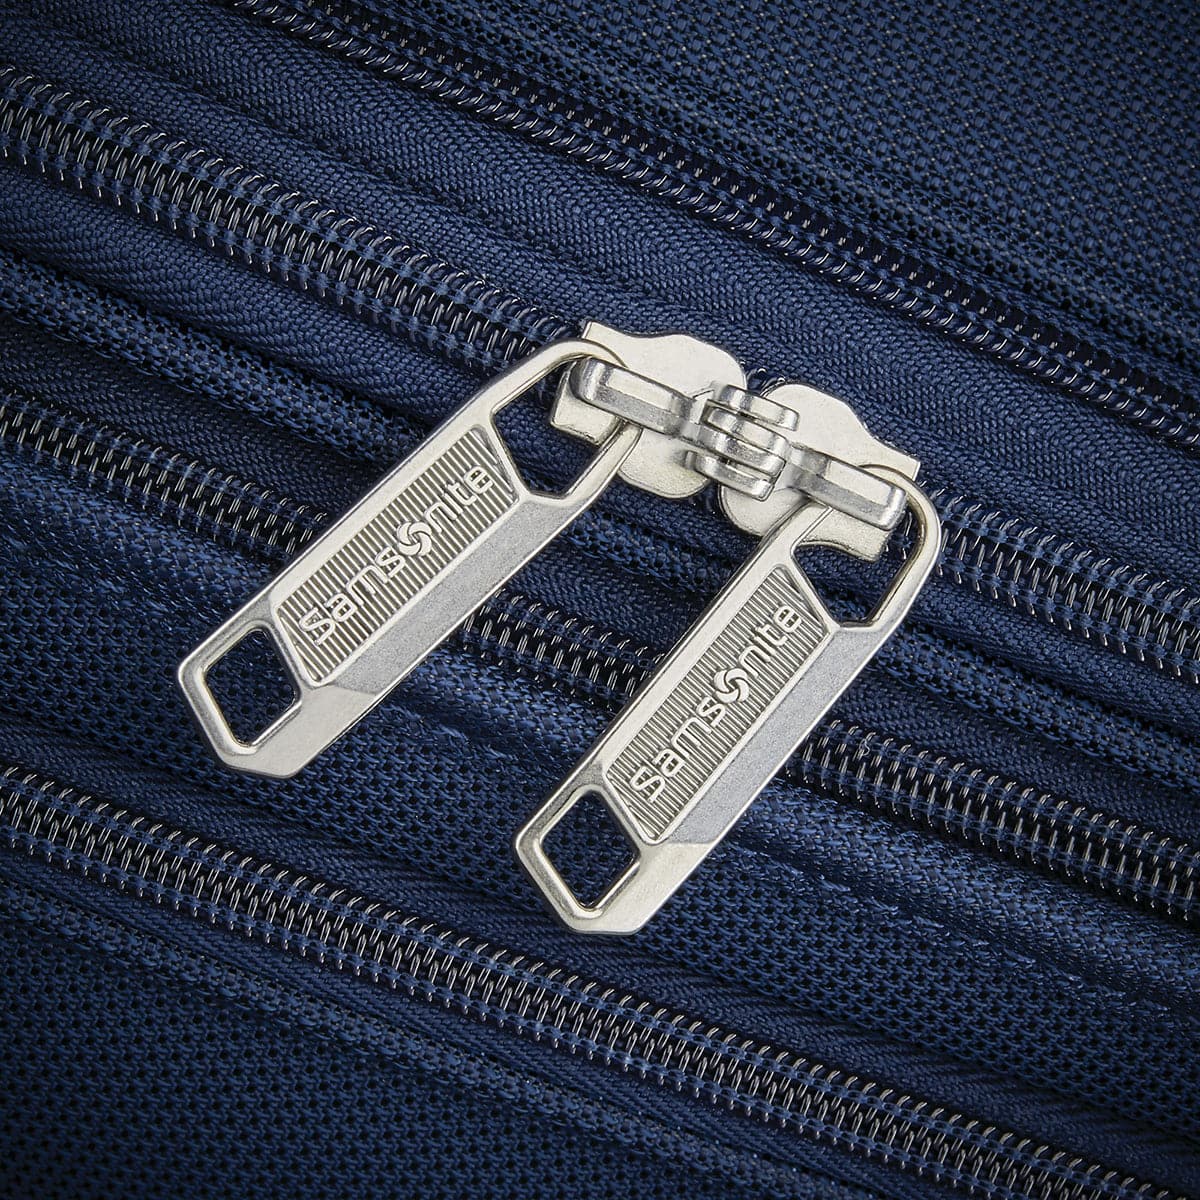 Samsonite Insignis Carry On Expandable Spinner